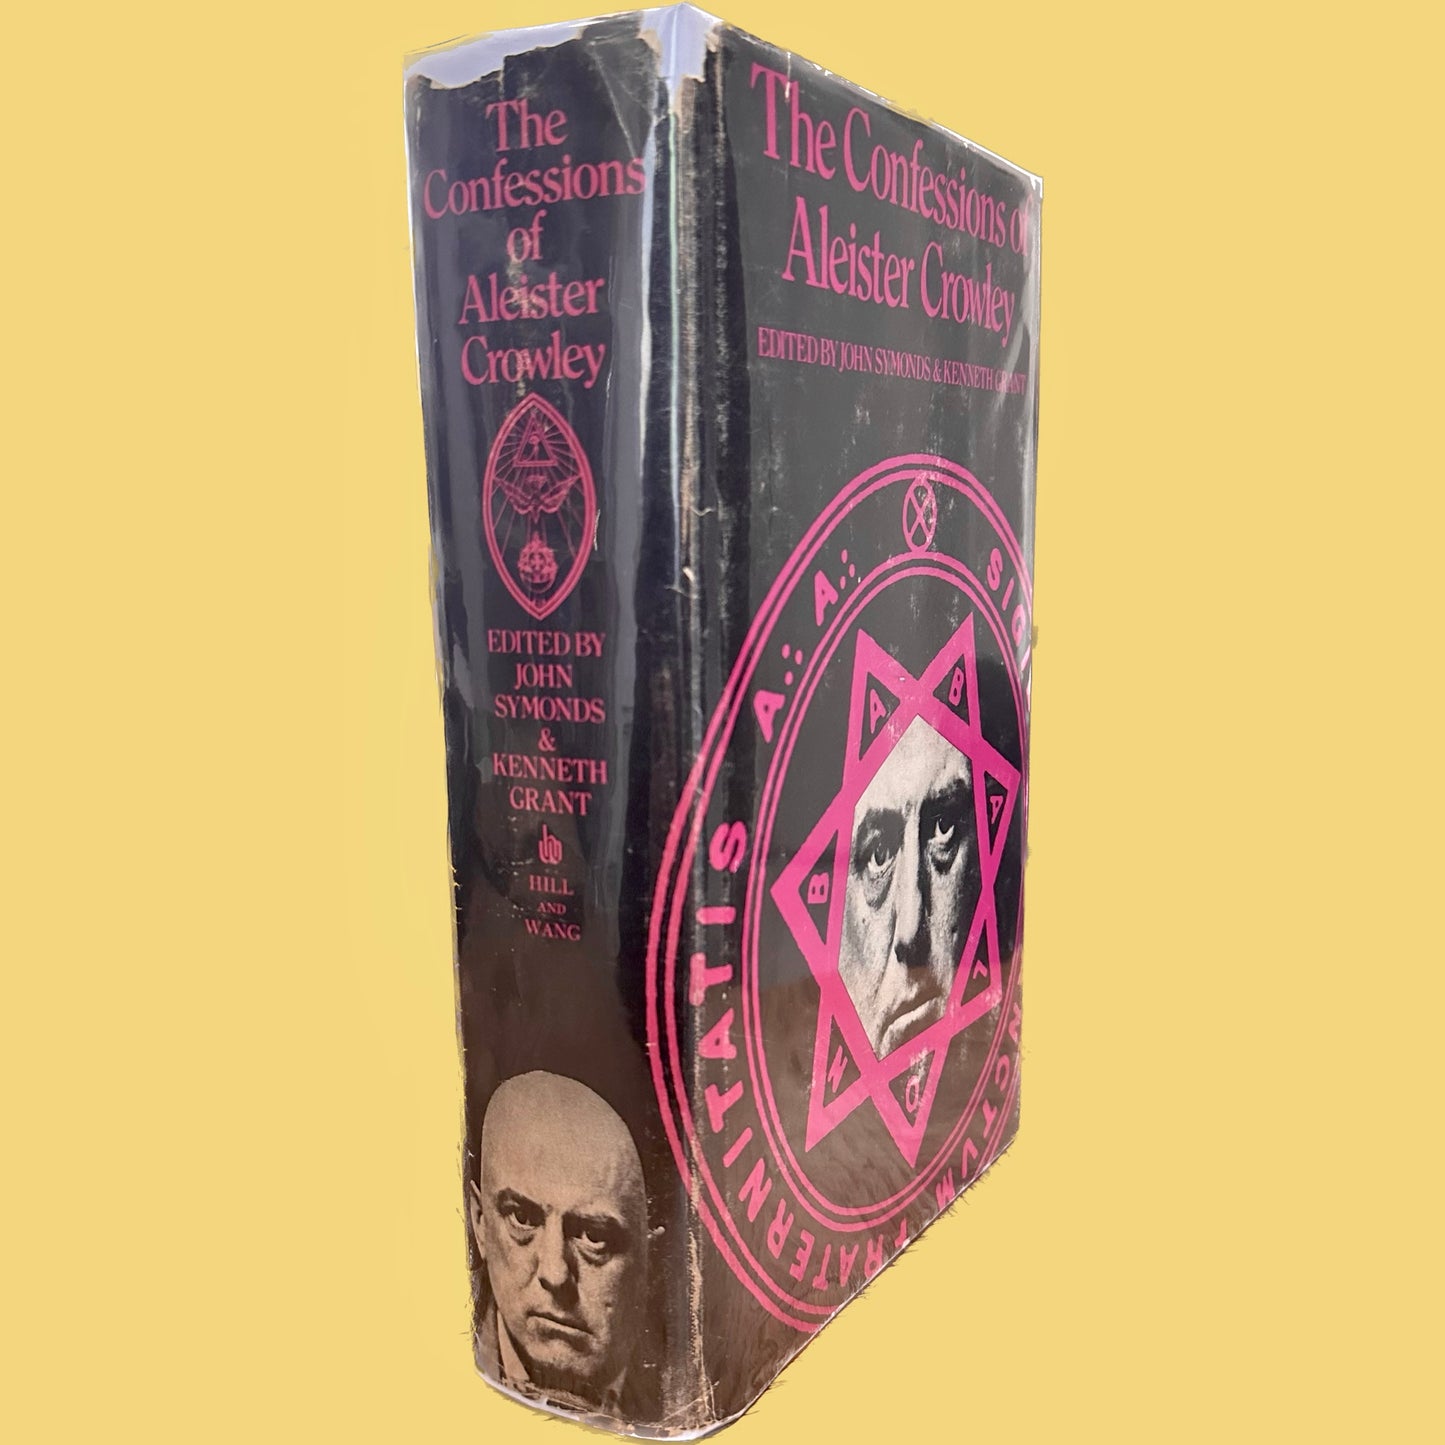 The Confessions of Aleister Crowley by Aleister Crowley, 1969